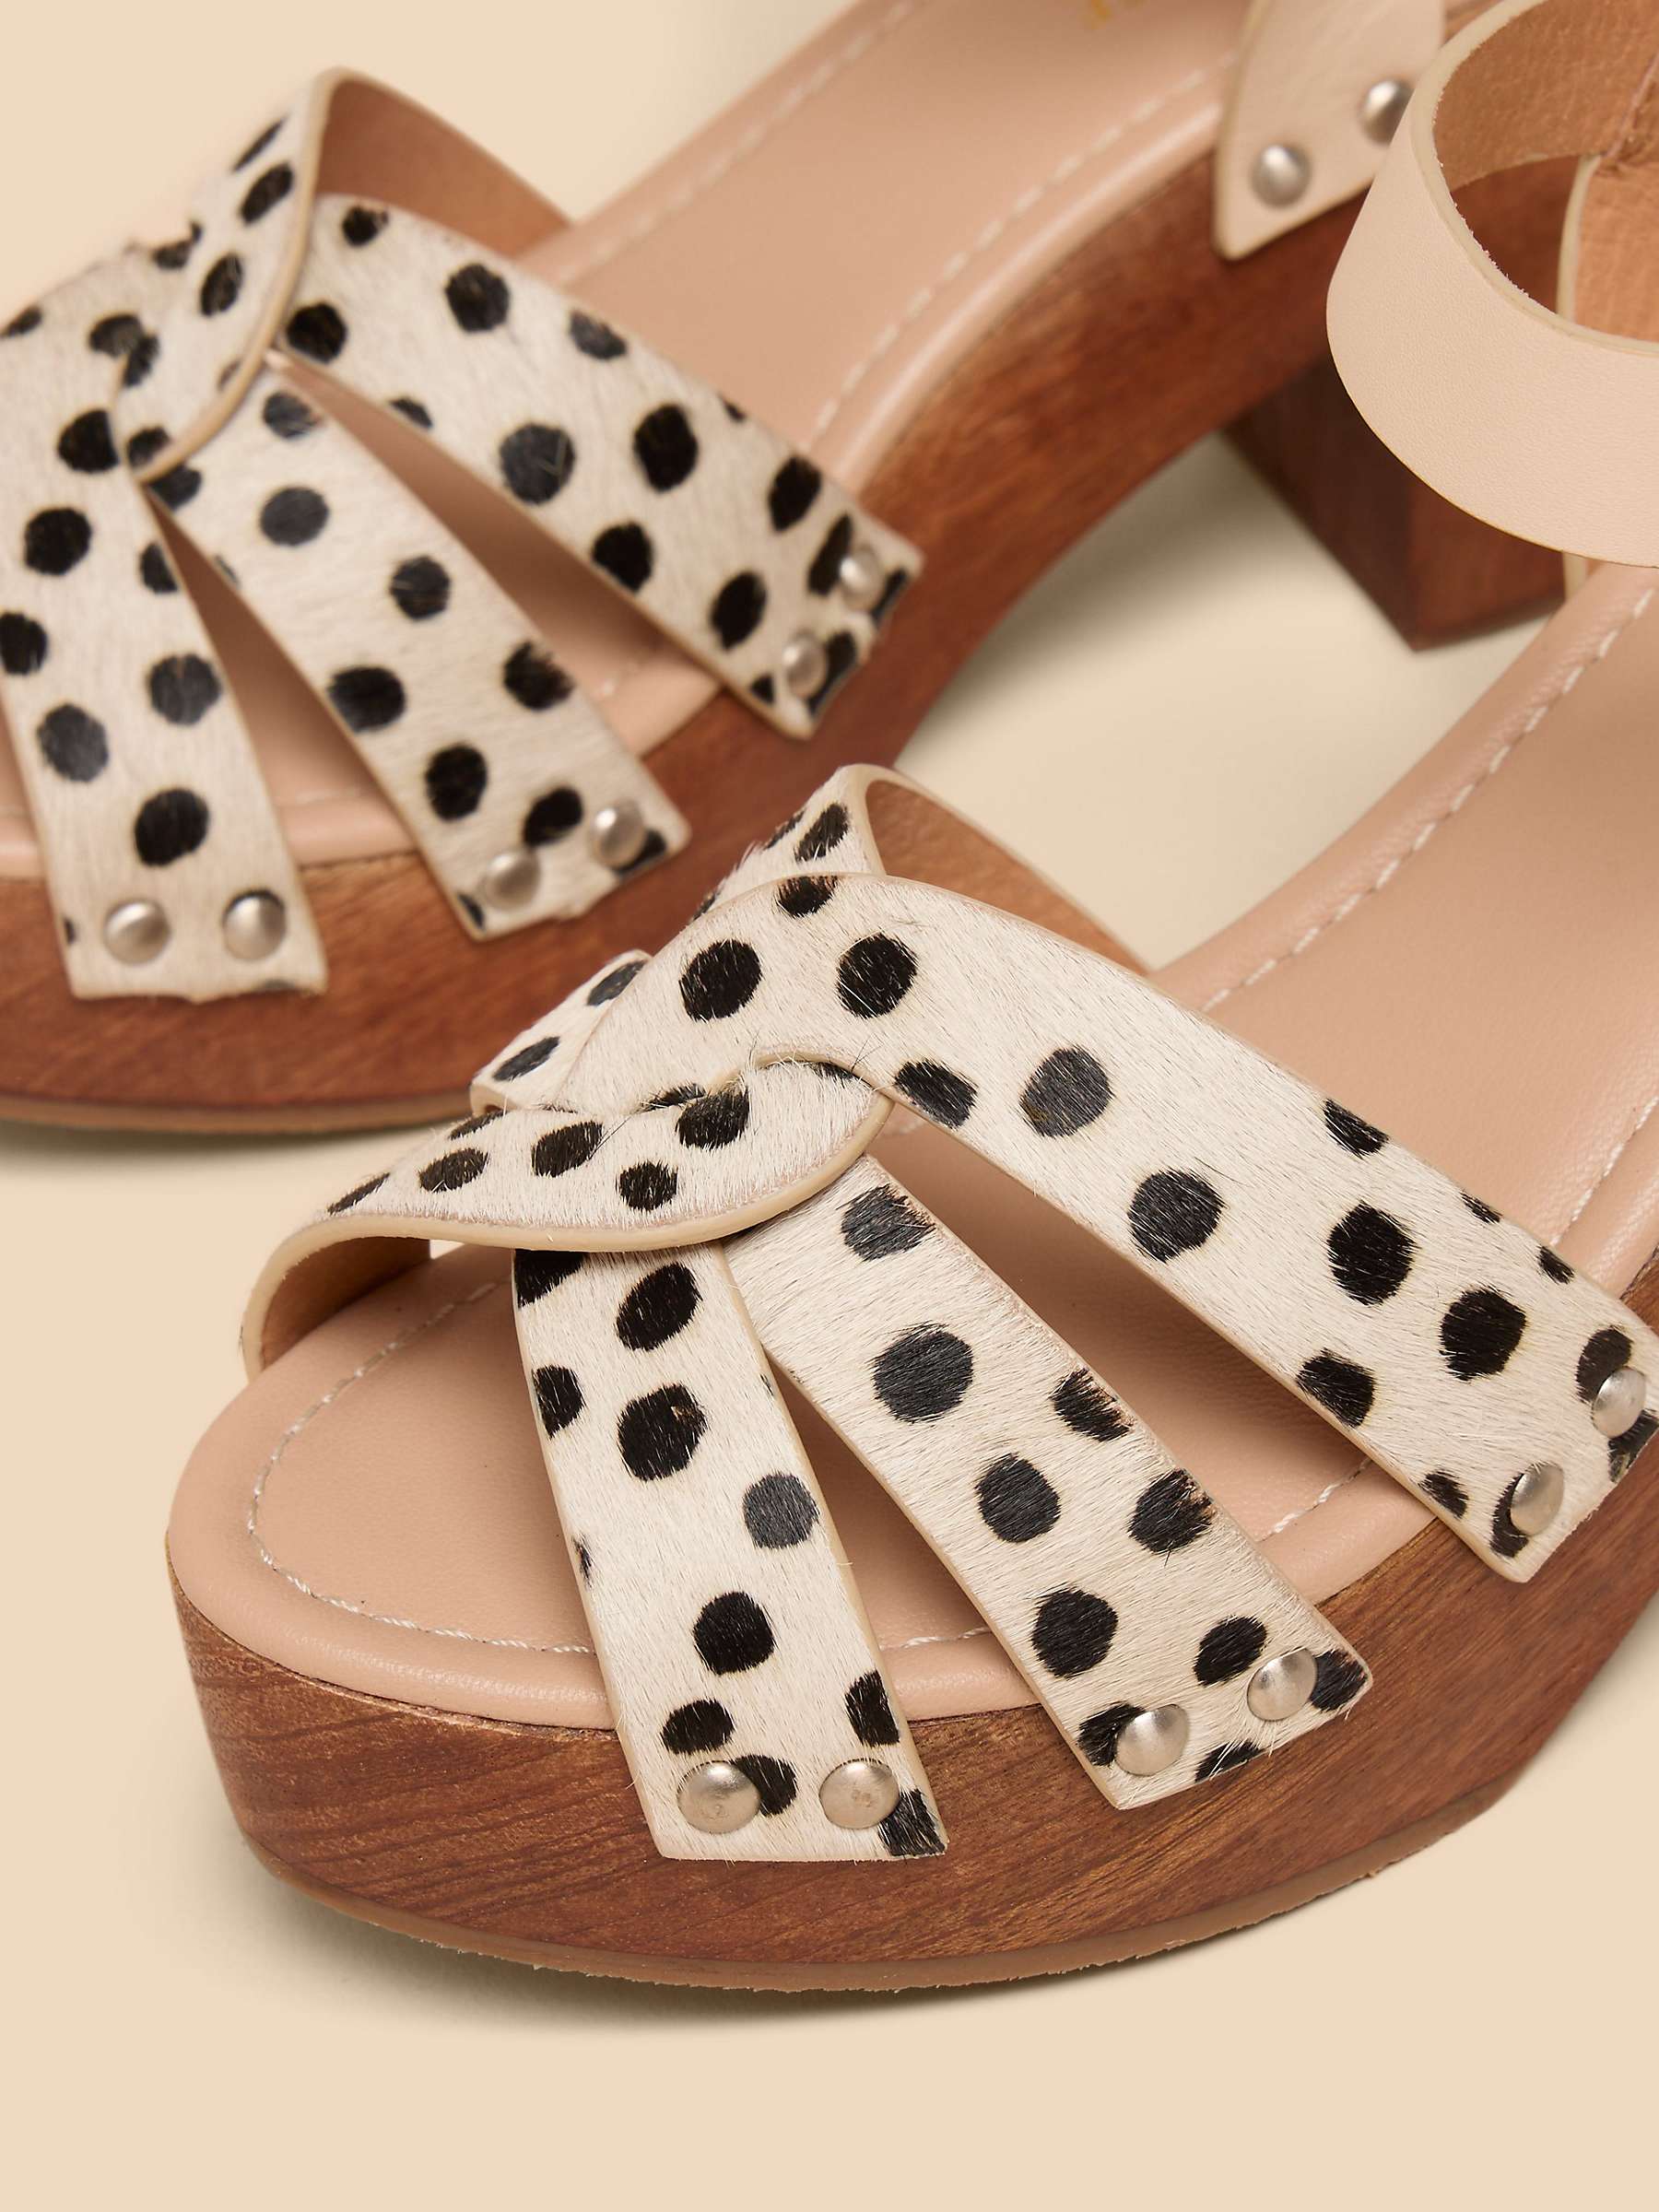 Buy White Stuff Cosmo Block Heel Clog Leather Sandals, Ivory/Multi Online at johnlewis.com